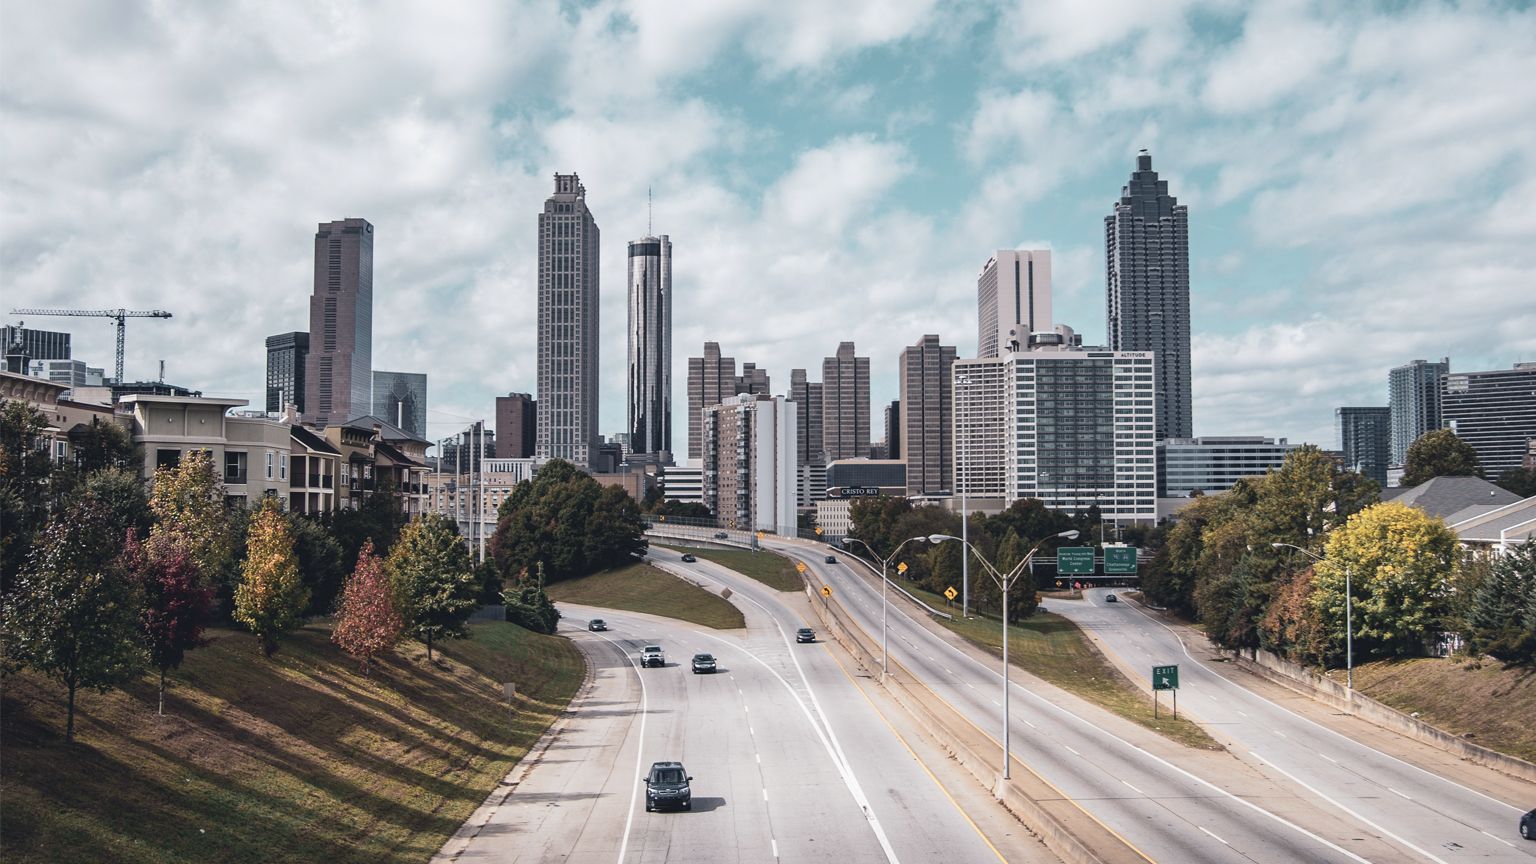 The Atlanta skyline as seen from a bridge over the I-75/85 access road in Midtown.